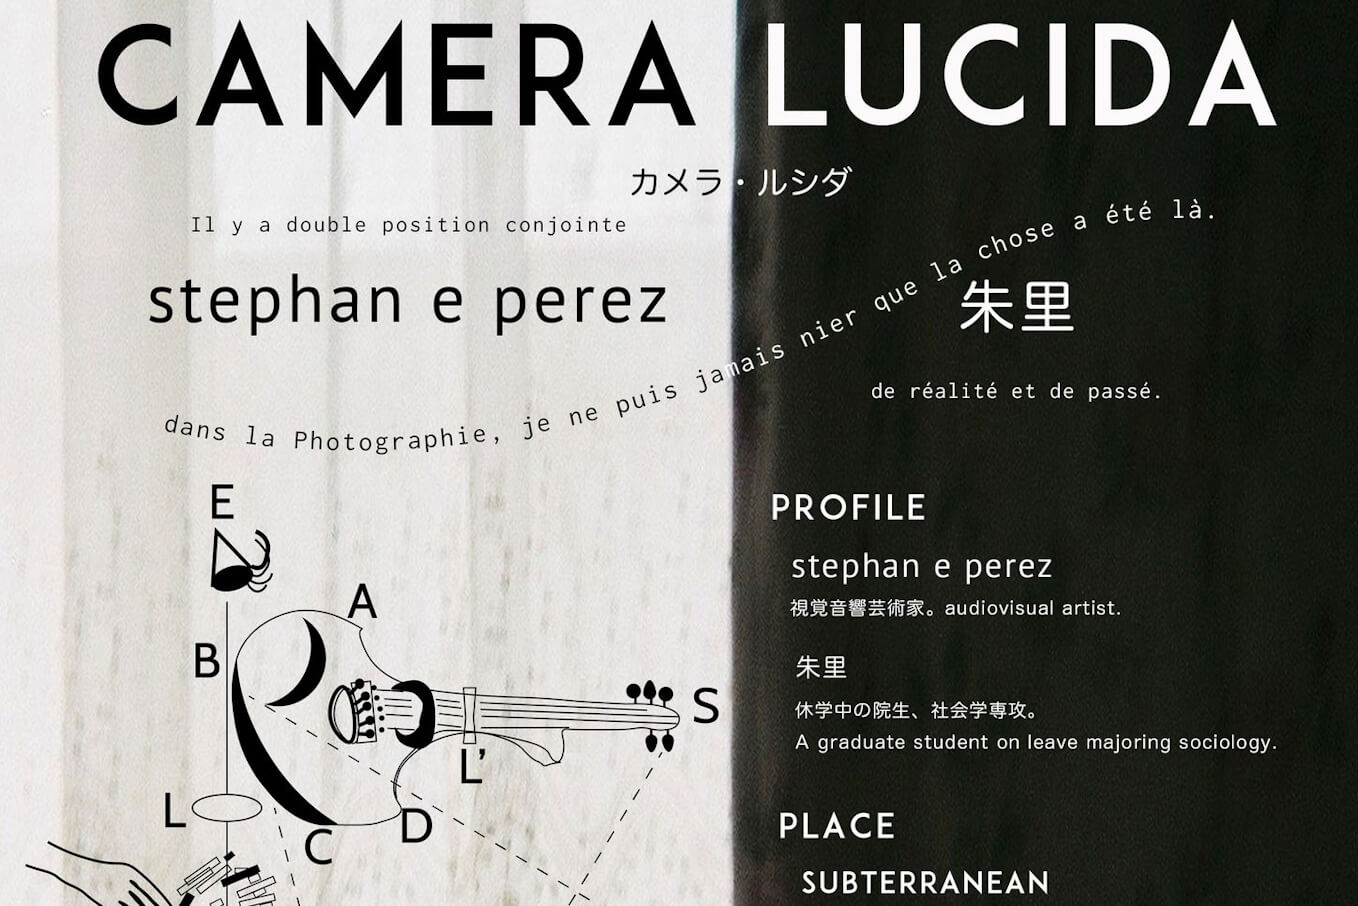 event flyer for 'camera lucida'. Has the subtitle 'Marginal Man 11'. Graphical elements showing a midi violin, jenga blocks, an eye, a hand, and various letters and dotted lines.